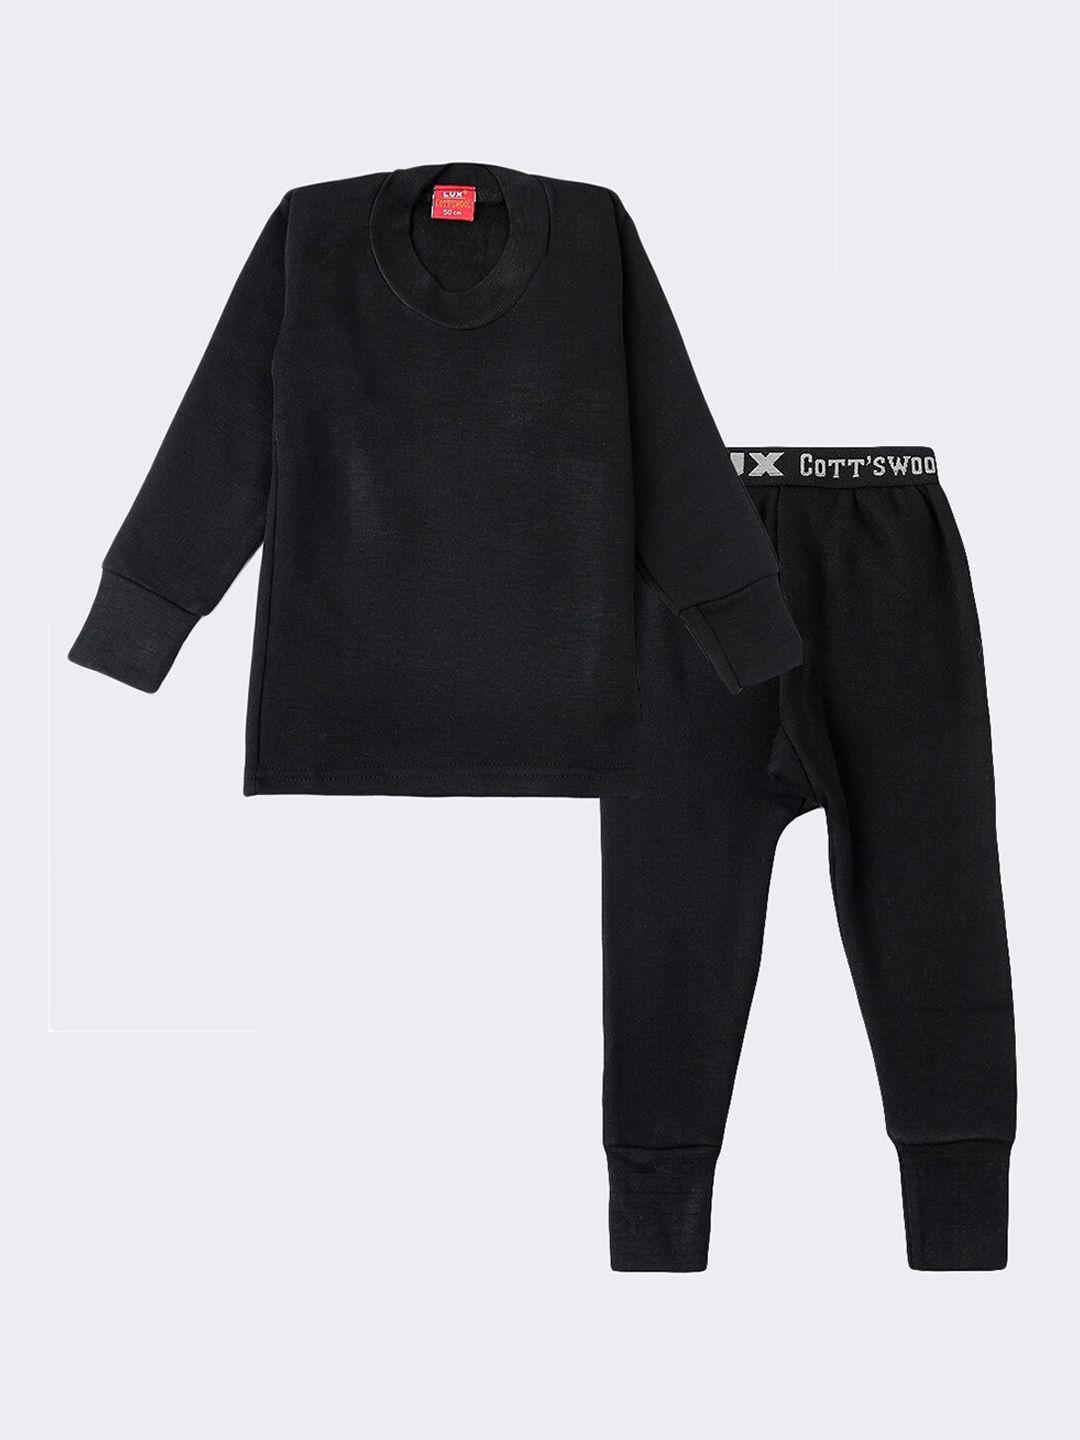 lux-cottswool-boys-black-solid-cotton-thermal-set